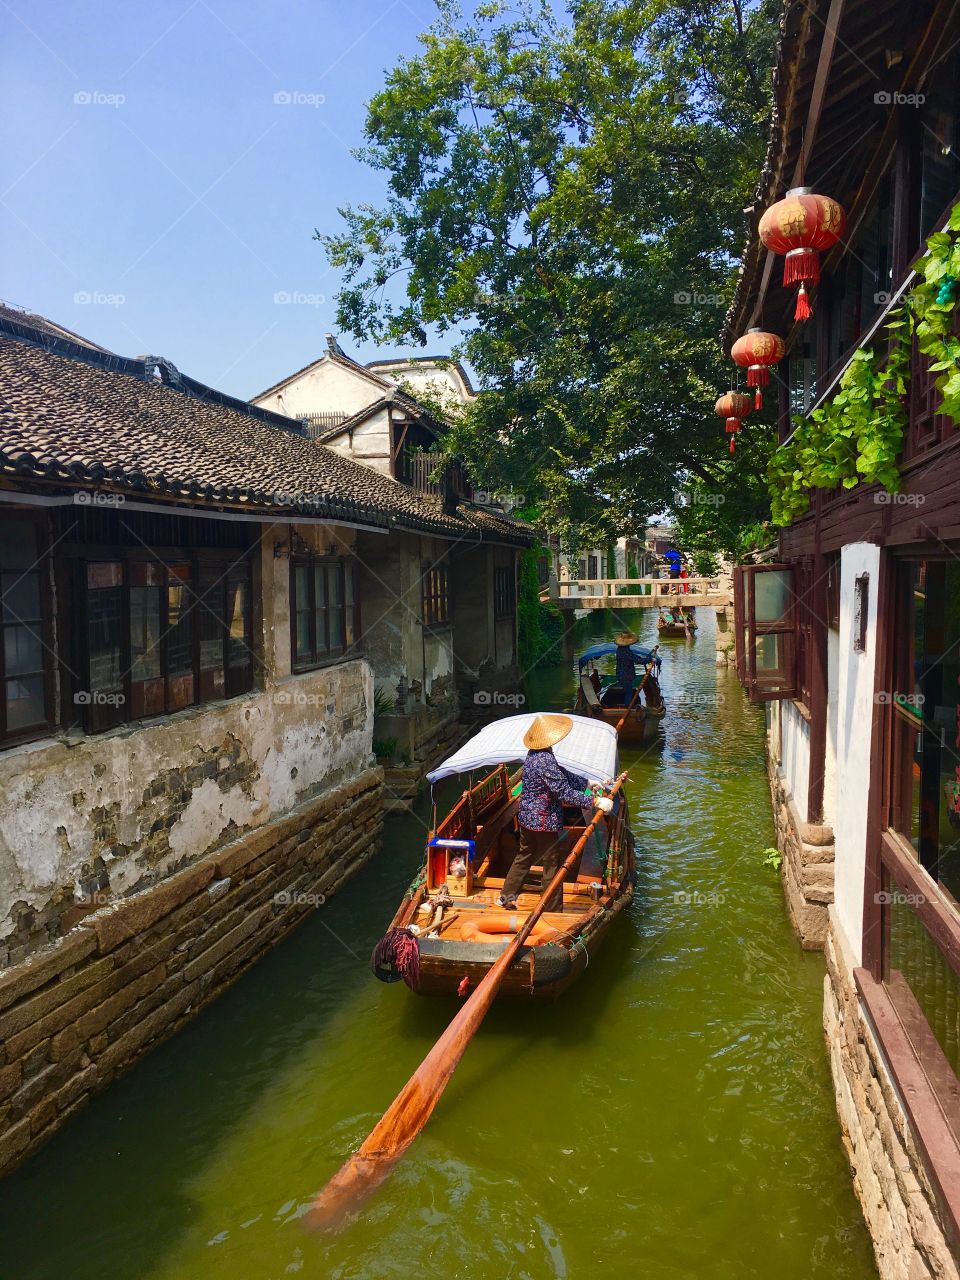 Festive singing and boat tours in Zhou Zhuang!